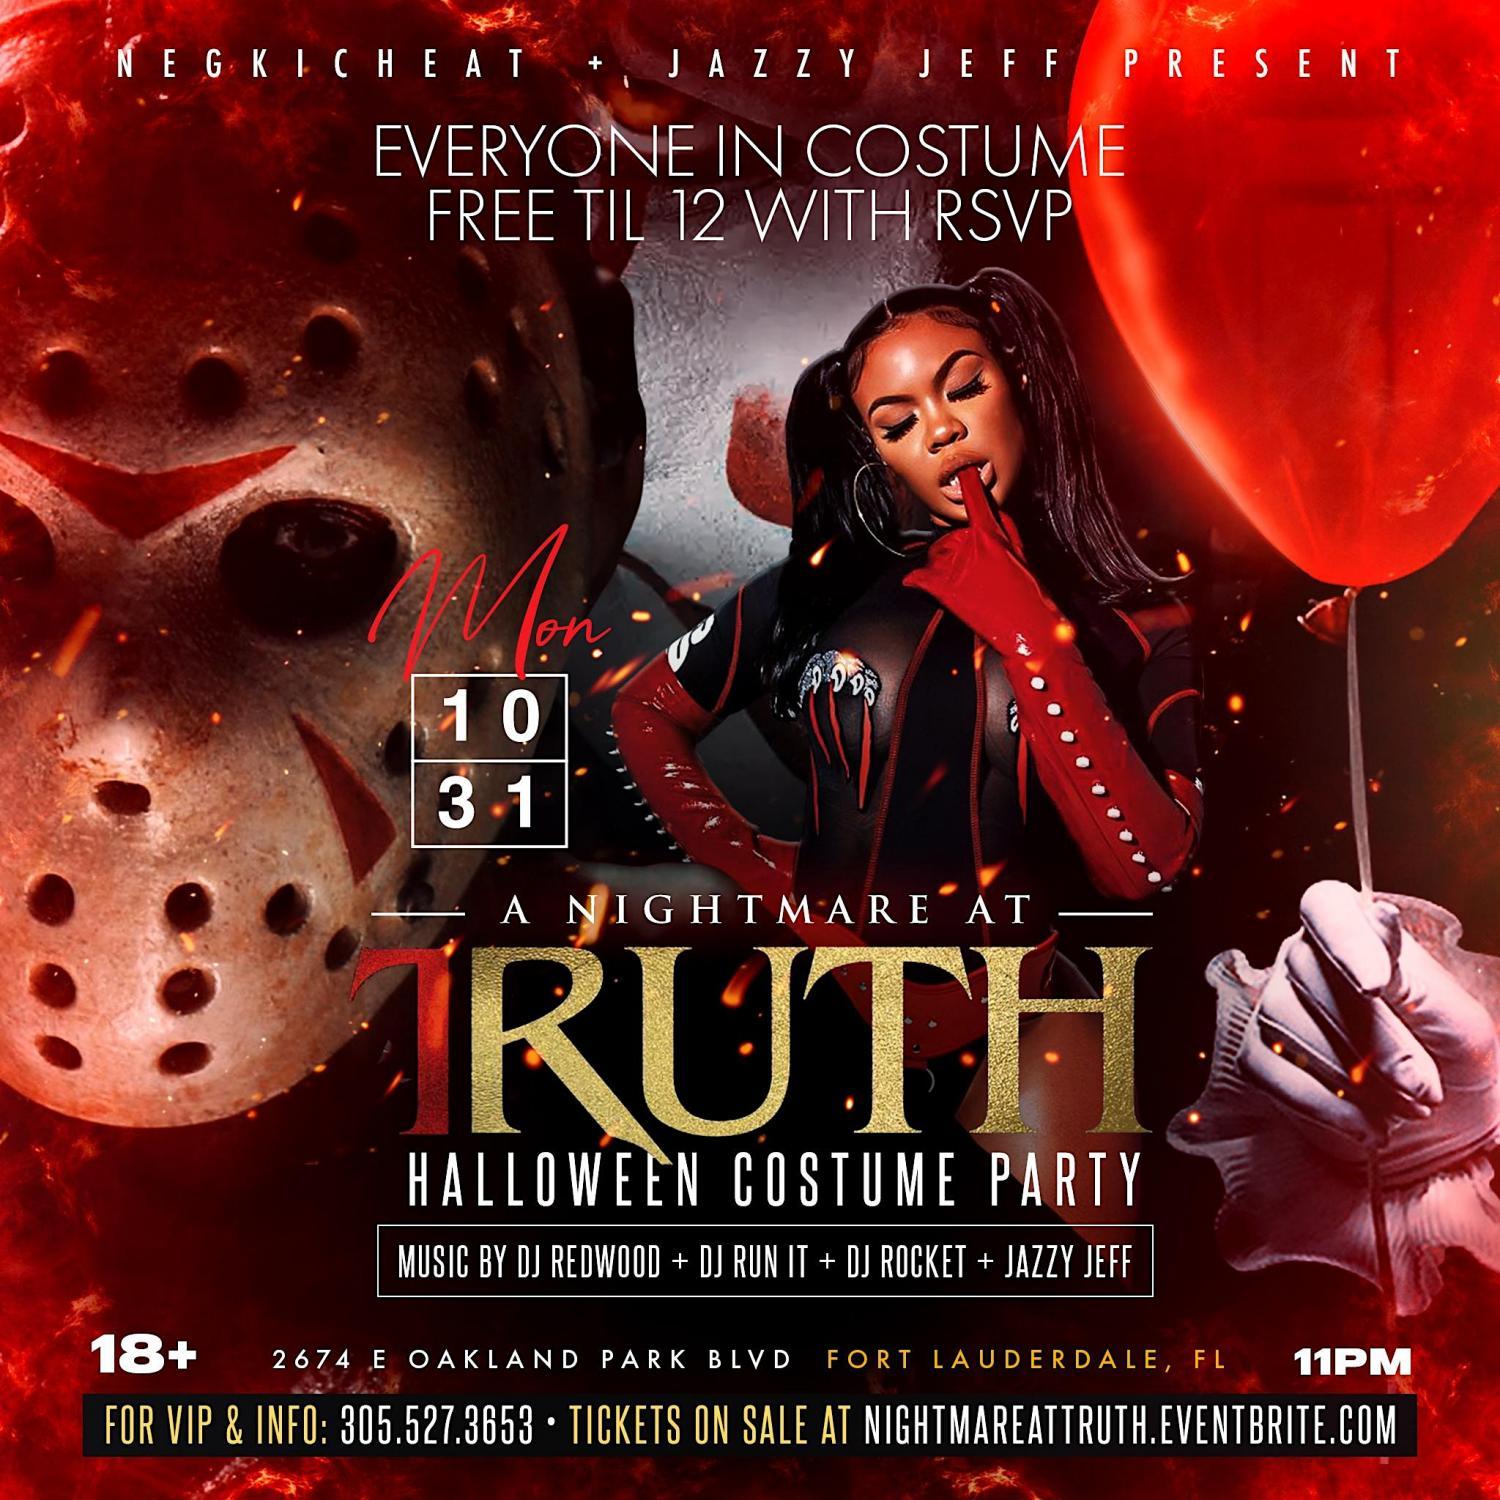 A NIGHTMARE AT TRUTH: HALLOWEEN COSTUME PARTY
Mon Oct 31, 11:00 PM - Tue Nov 1, 4:00 AM
in 11 days